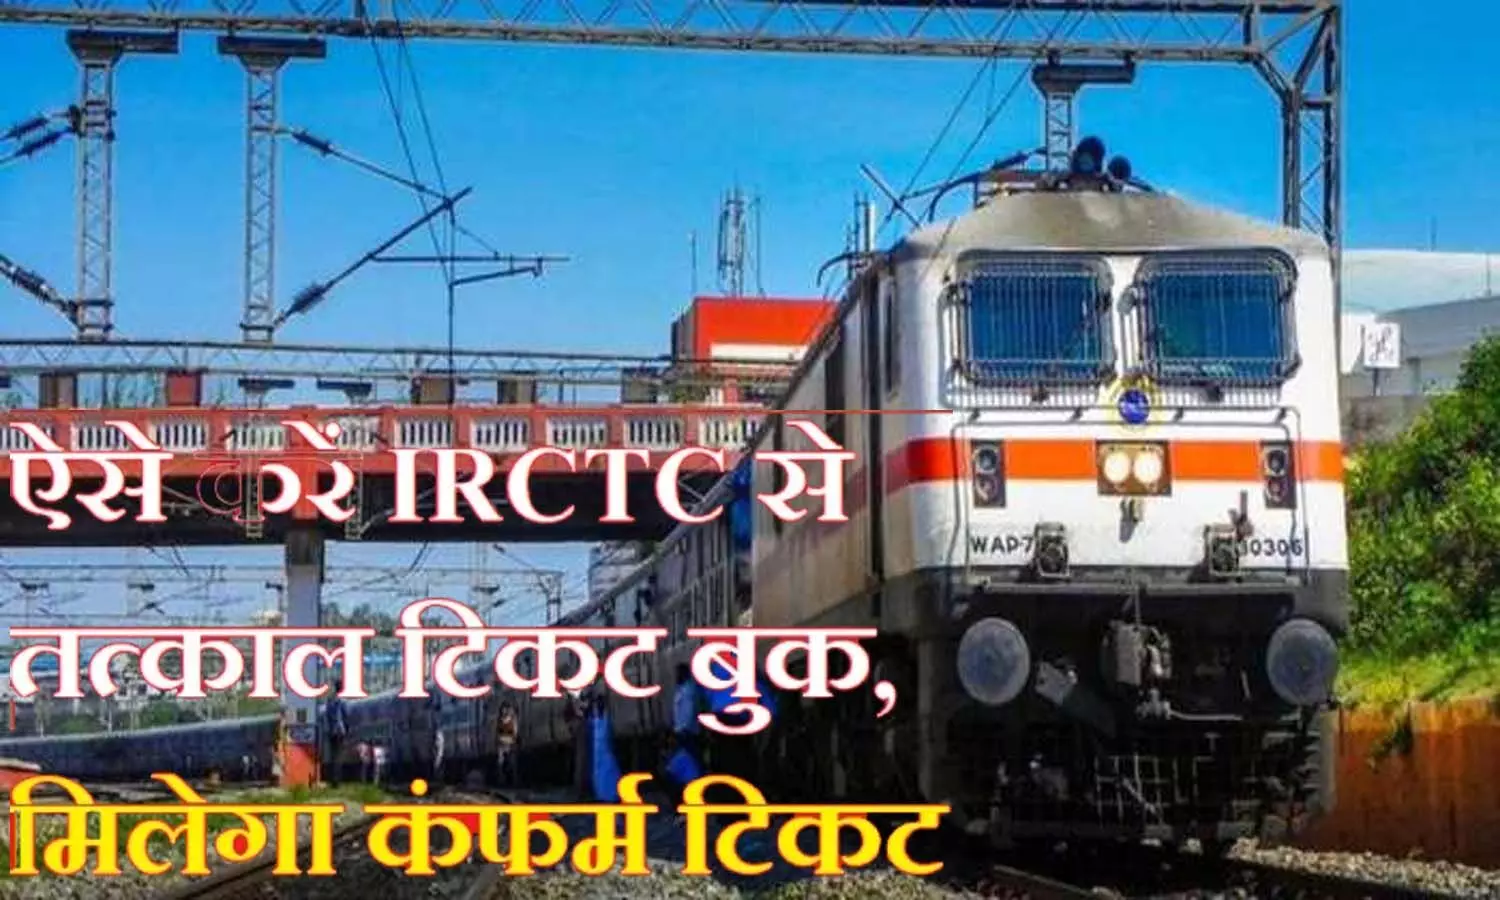 IRCTC Tatkal Booking: Follow this trick to book train tickets in Tatkal, you will get confirmed tickets instantly